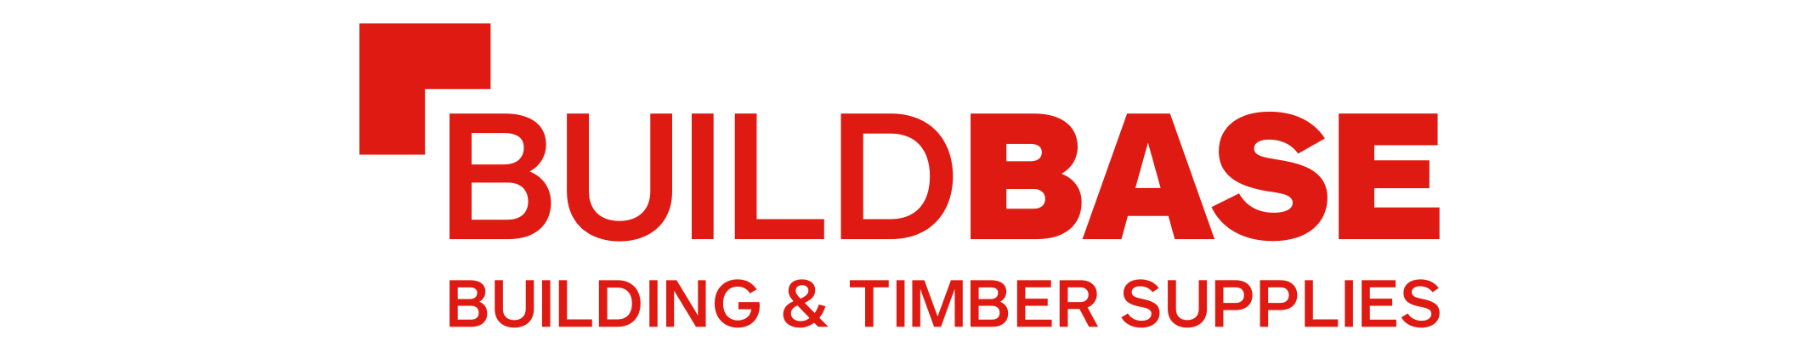 Your one stop shop for all things Buildbase